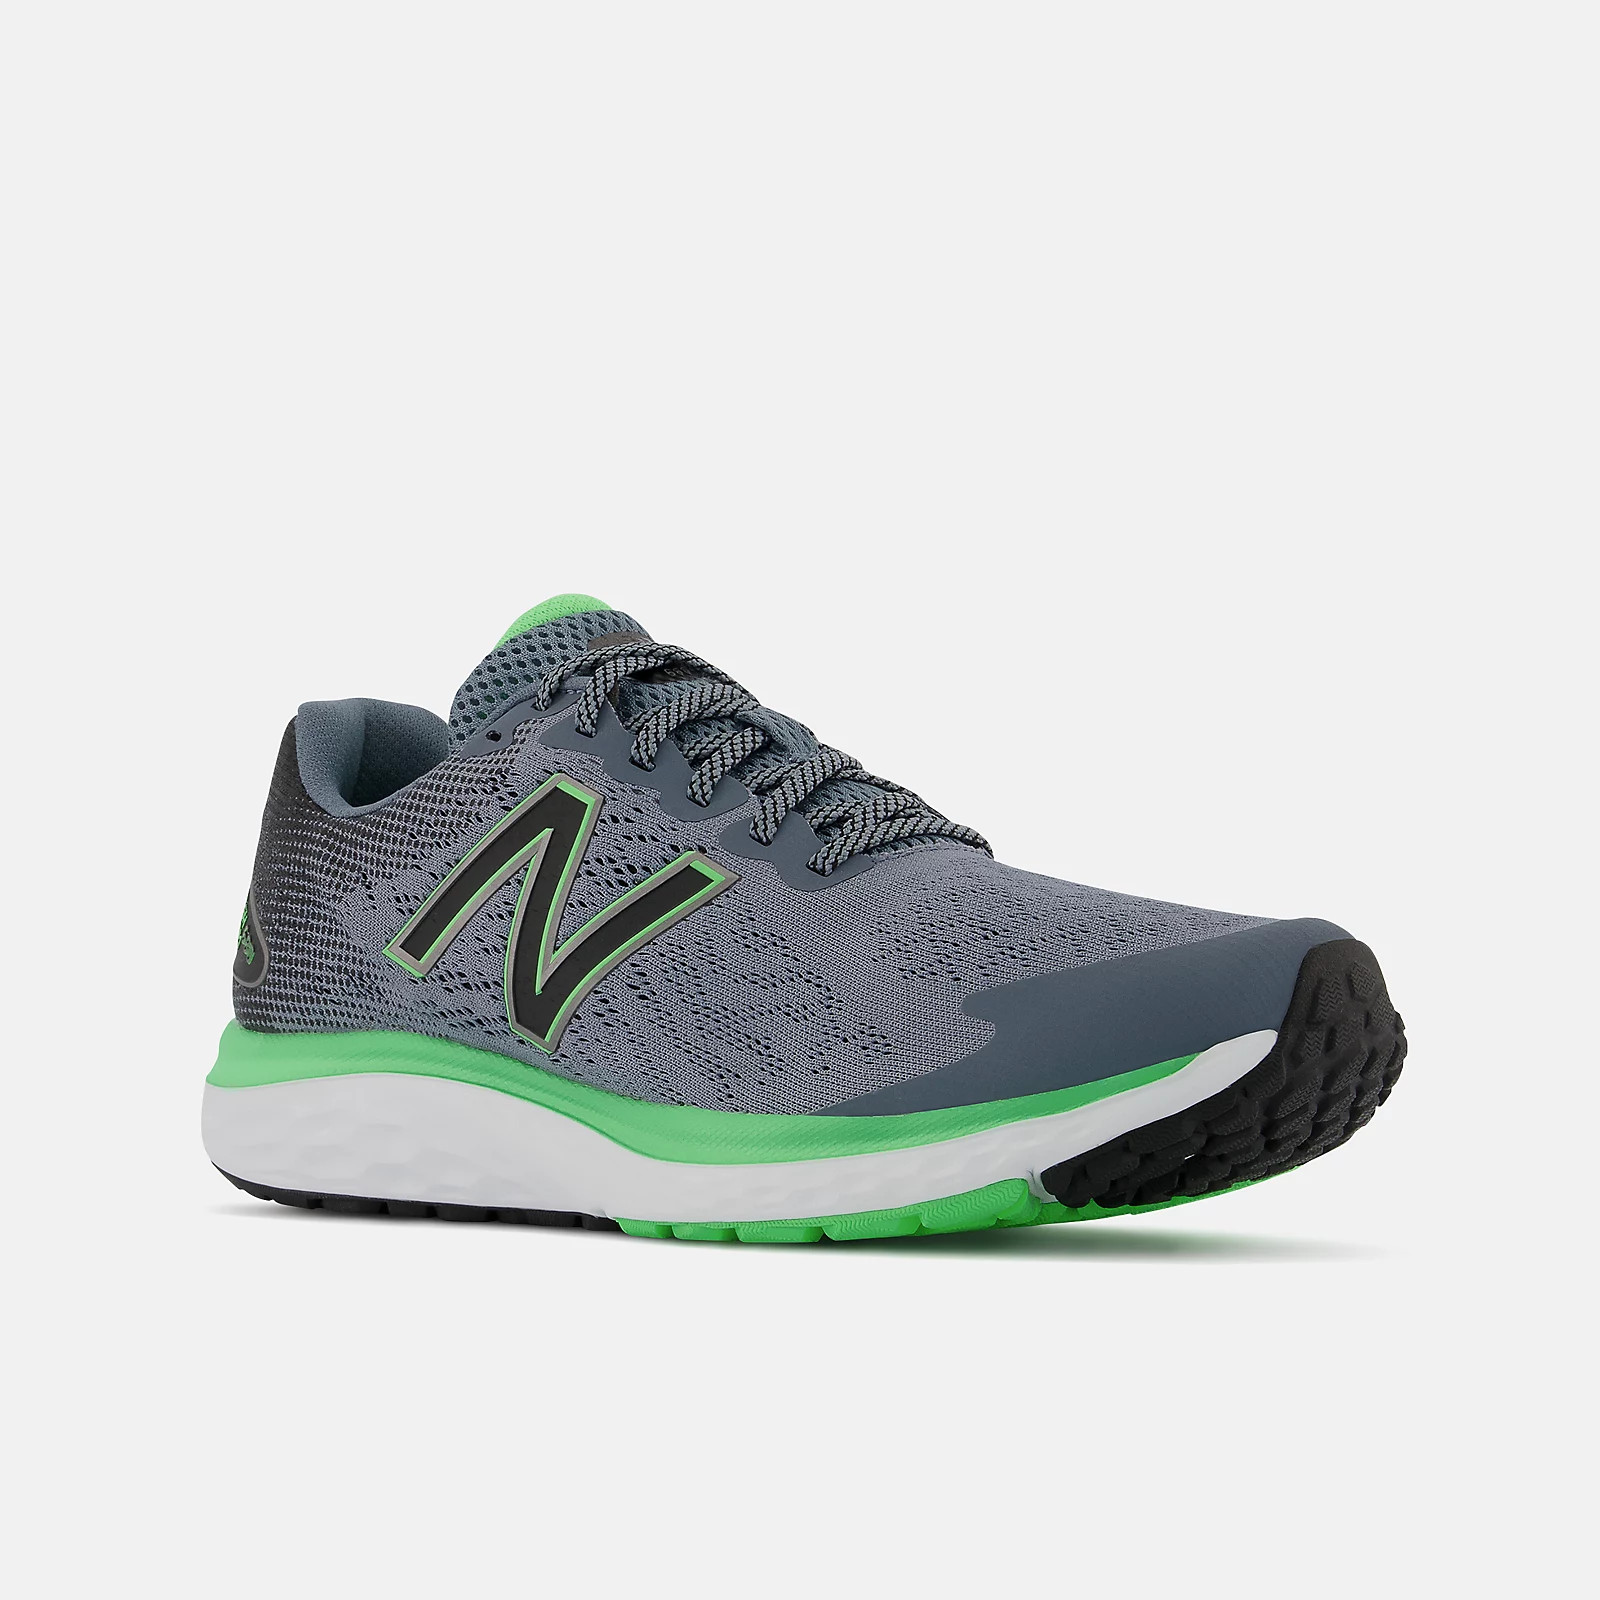 New Balance Mens Sneakers Grey/Lime/White - Kimberley Country ...